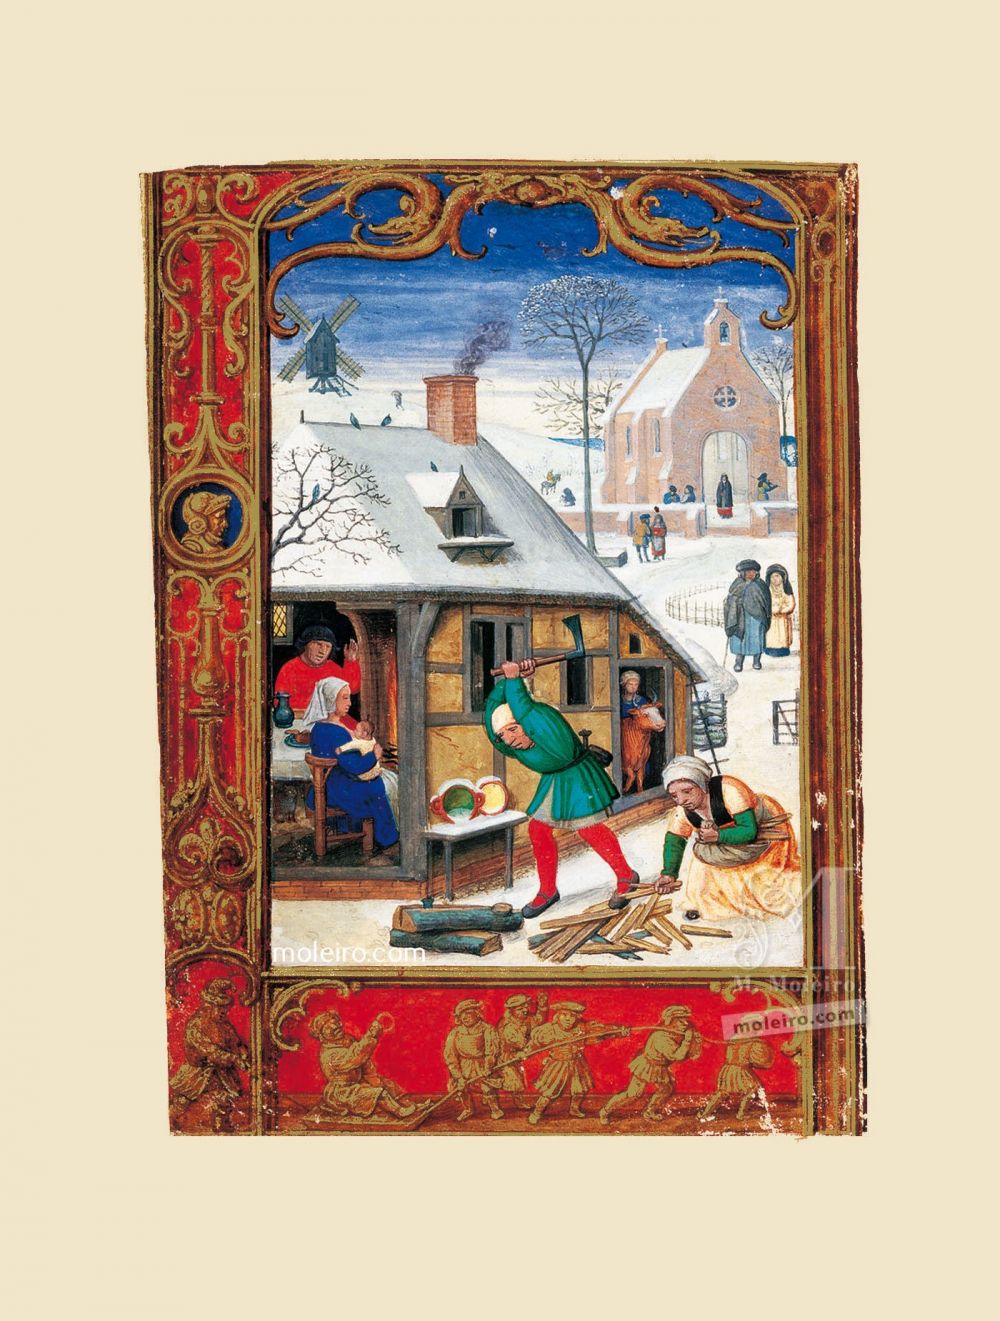 The Golf Book (Book of Hours) f. 18v, January, winter labour